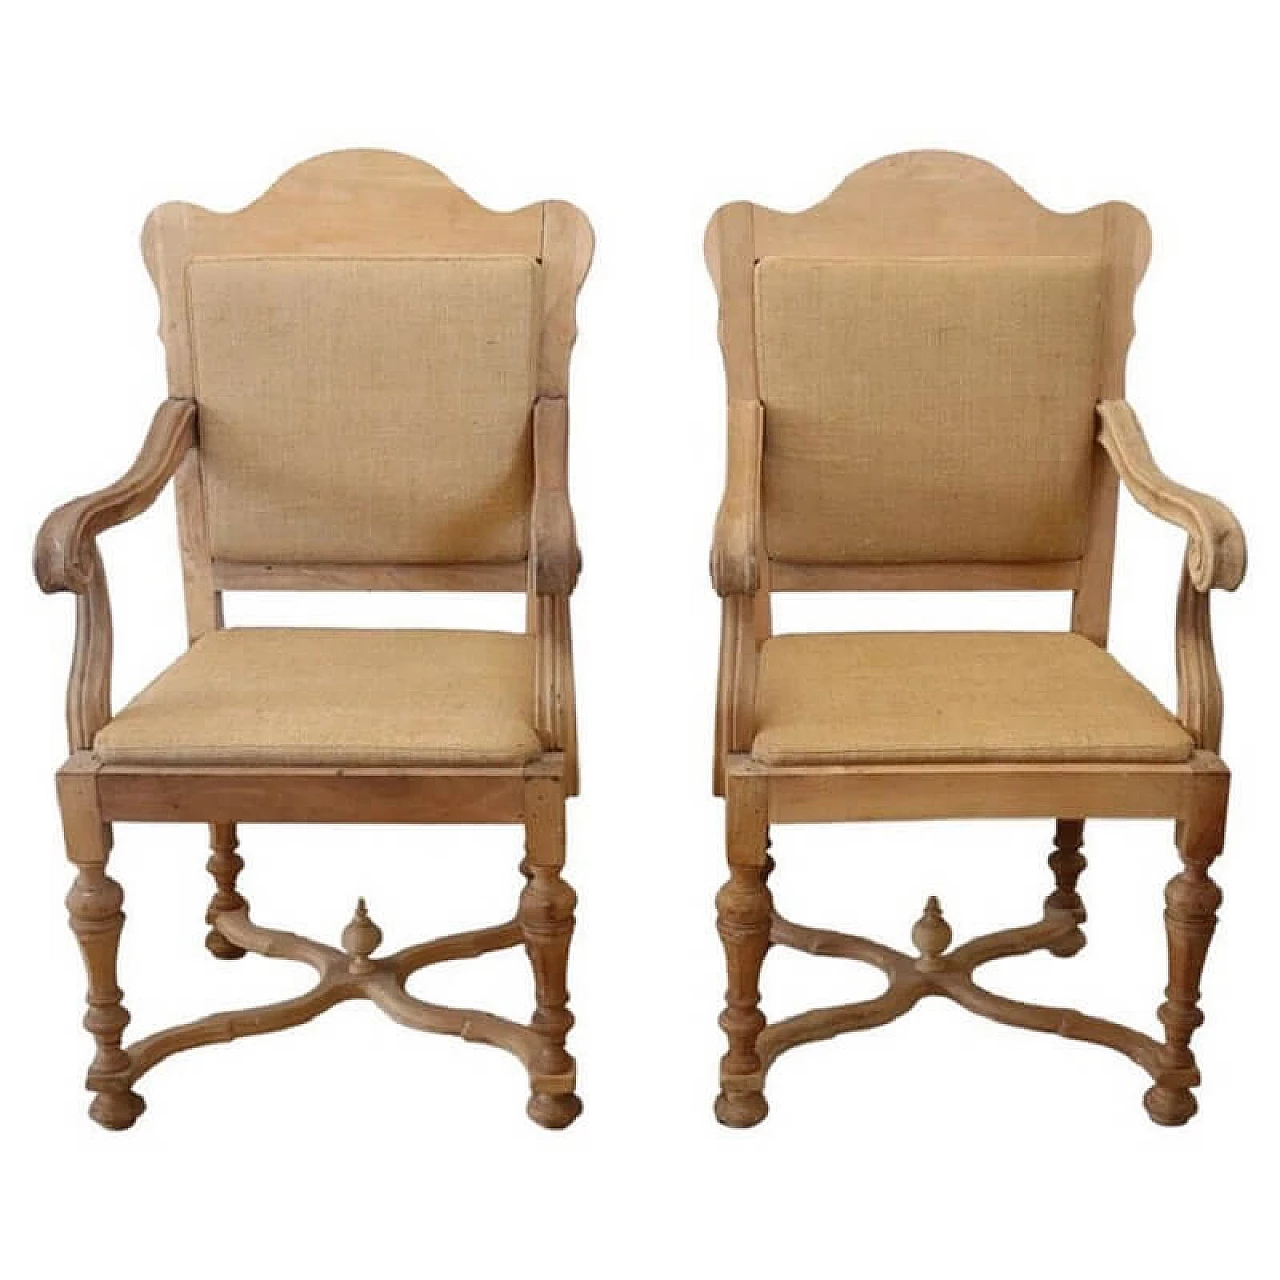 Pair of poplar armchairs with natural finish and jute seat, 1930s 1